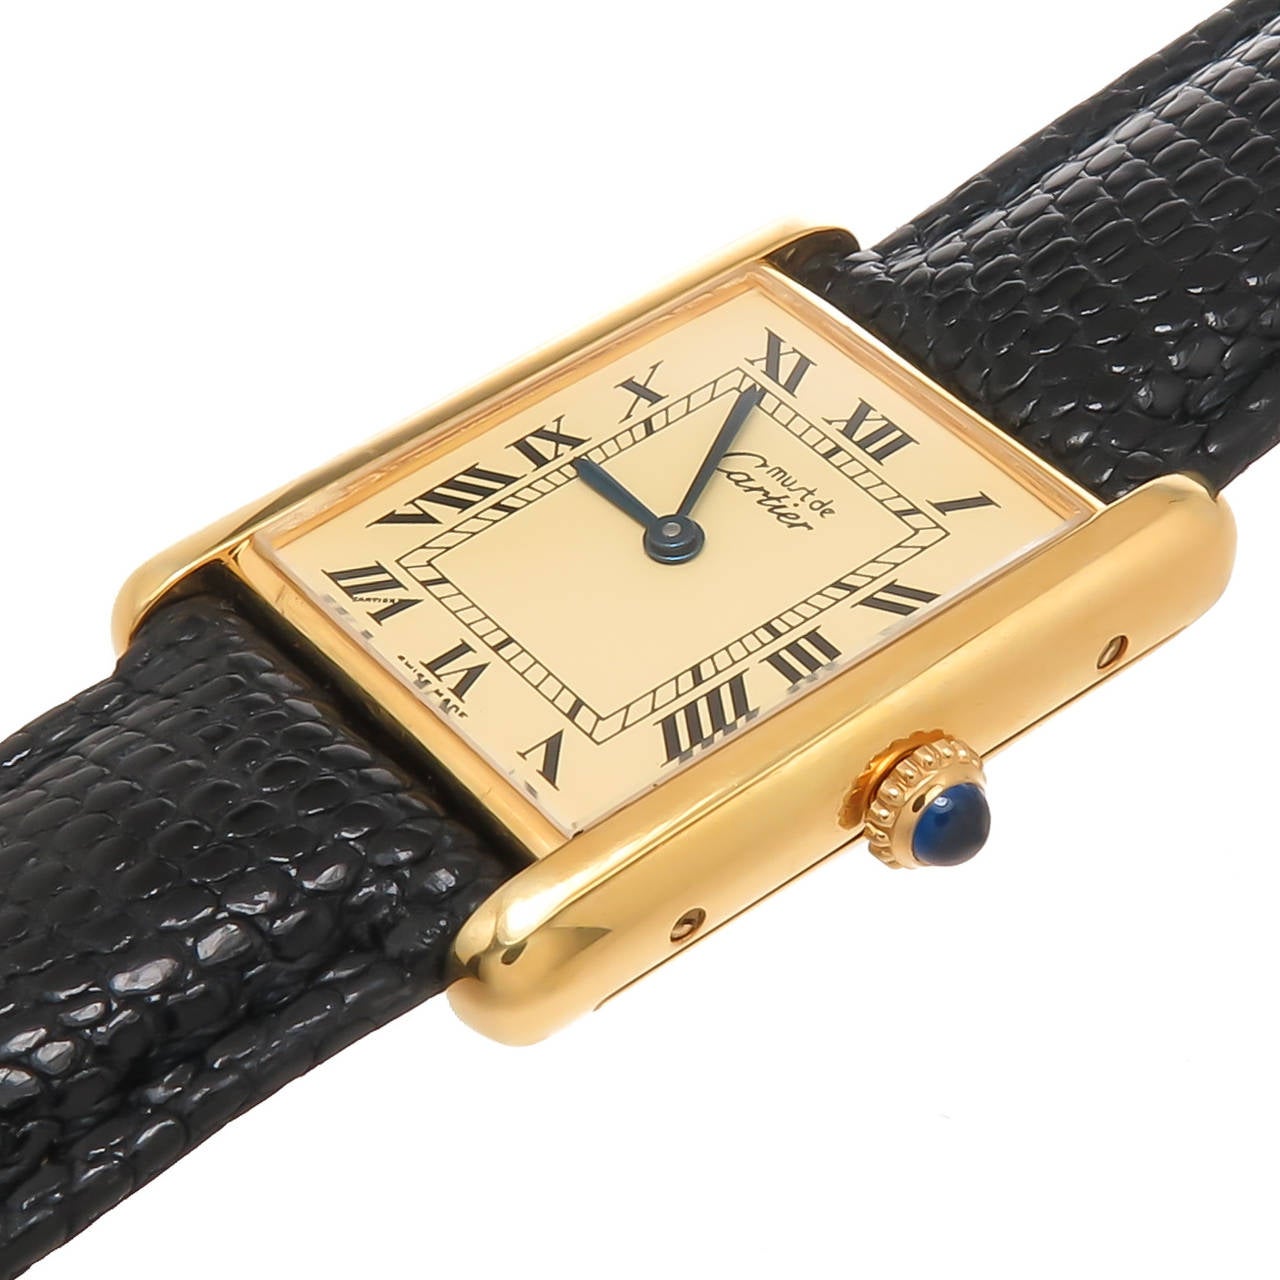 Circa 2005 Cartier Classic Vermeil, Gold Plate on sterling silver Tank Watch, measuring 1 1/4 X 7/8 Inch, Quartz Movement, light cream color Dial with Black Roman Numerals, Sapphire Crown. New Black padded Lizard strap with Gold Plated Cartier Buckle